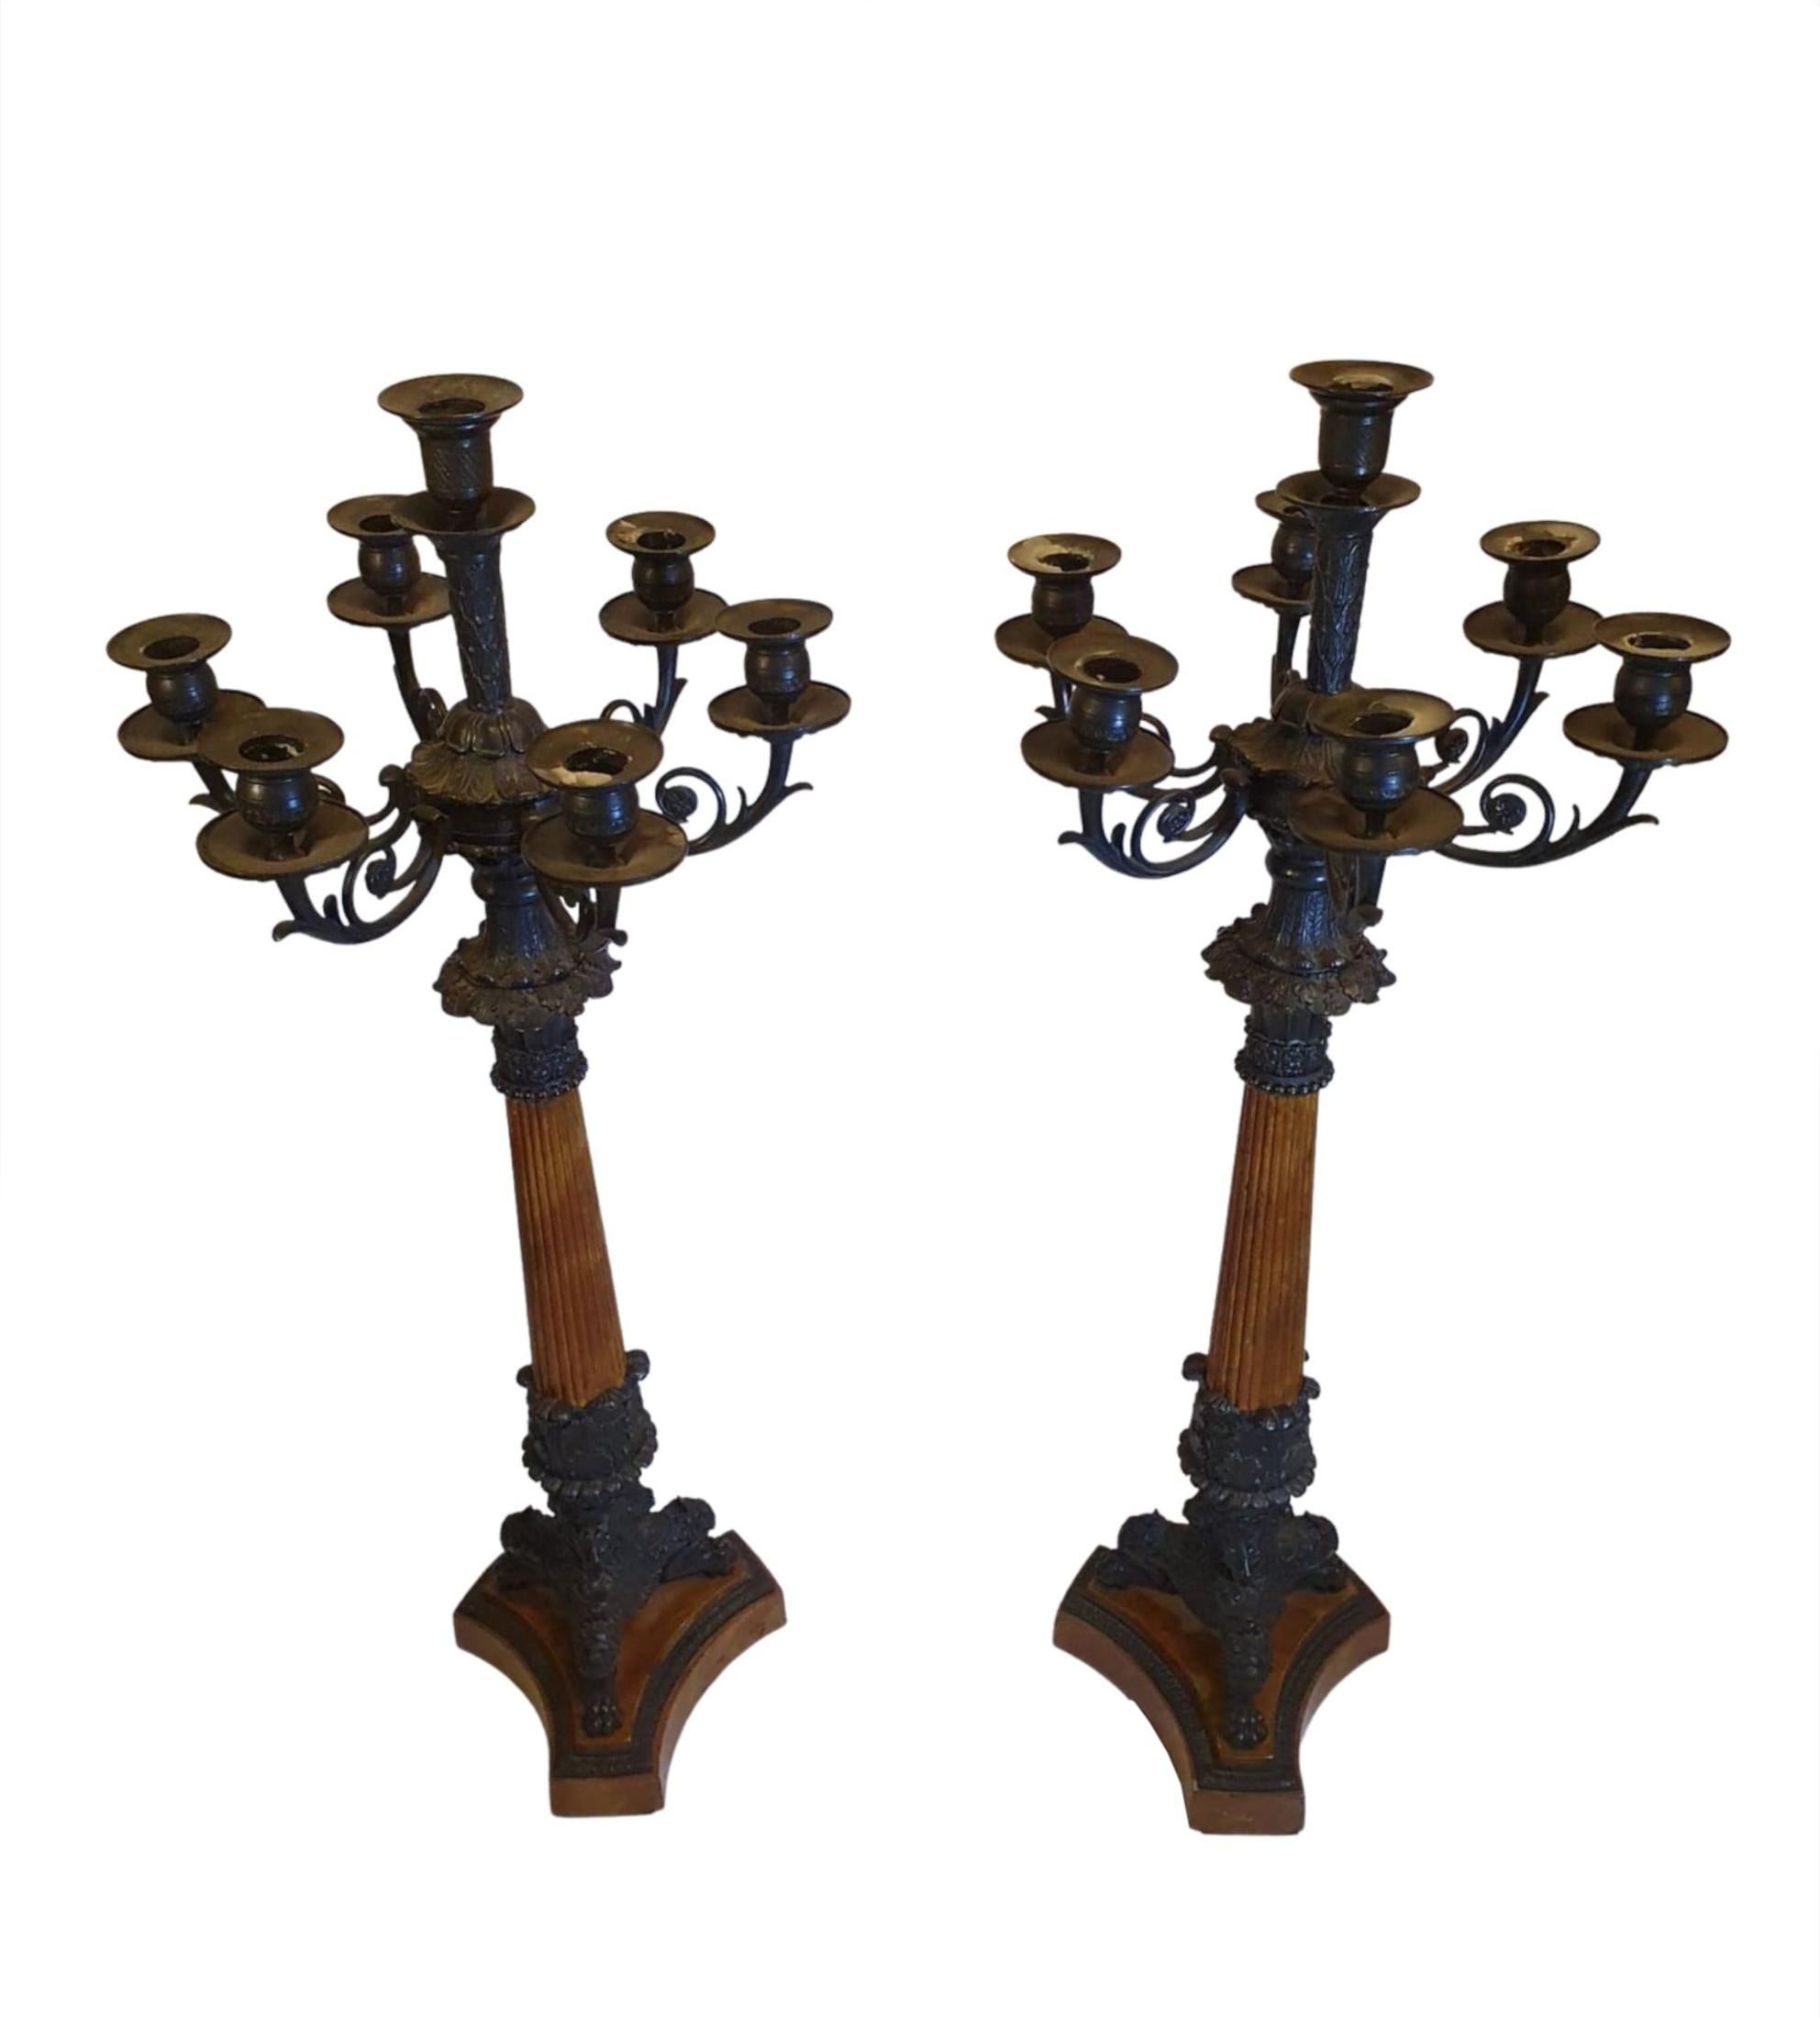 A rare and fine pair of 19th Century bronze seven branch candelabra in the Empire style with intricate scroll and foliate motifs throughout with fluted columnar stem supported on triform paw foot, terminating on inverted platform base.

Some